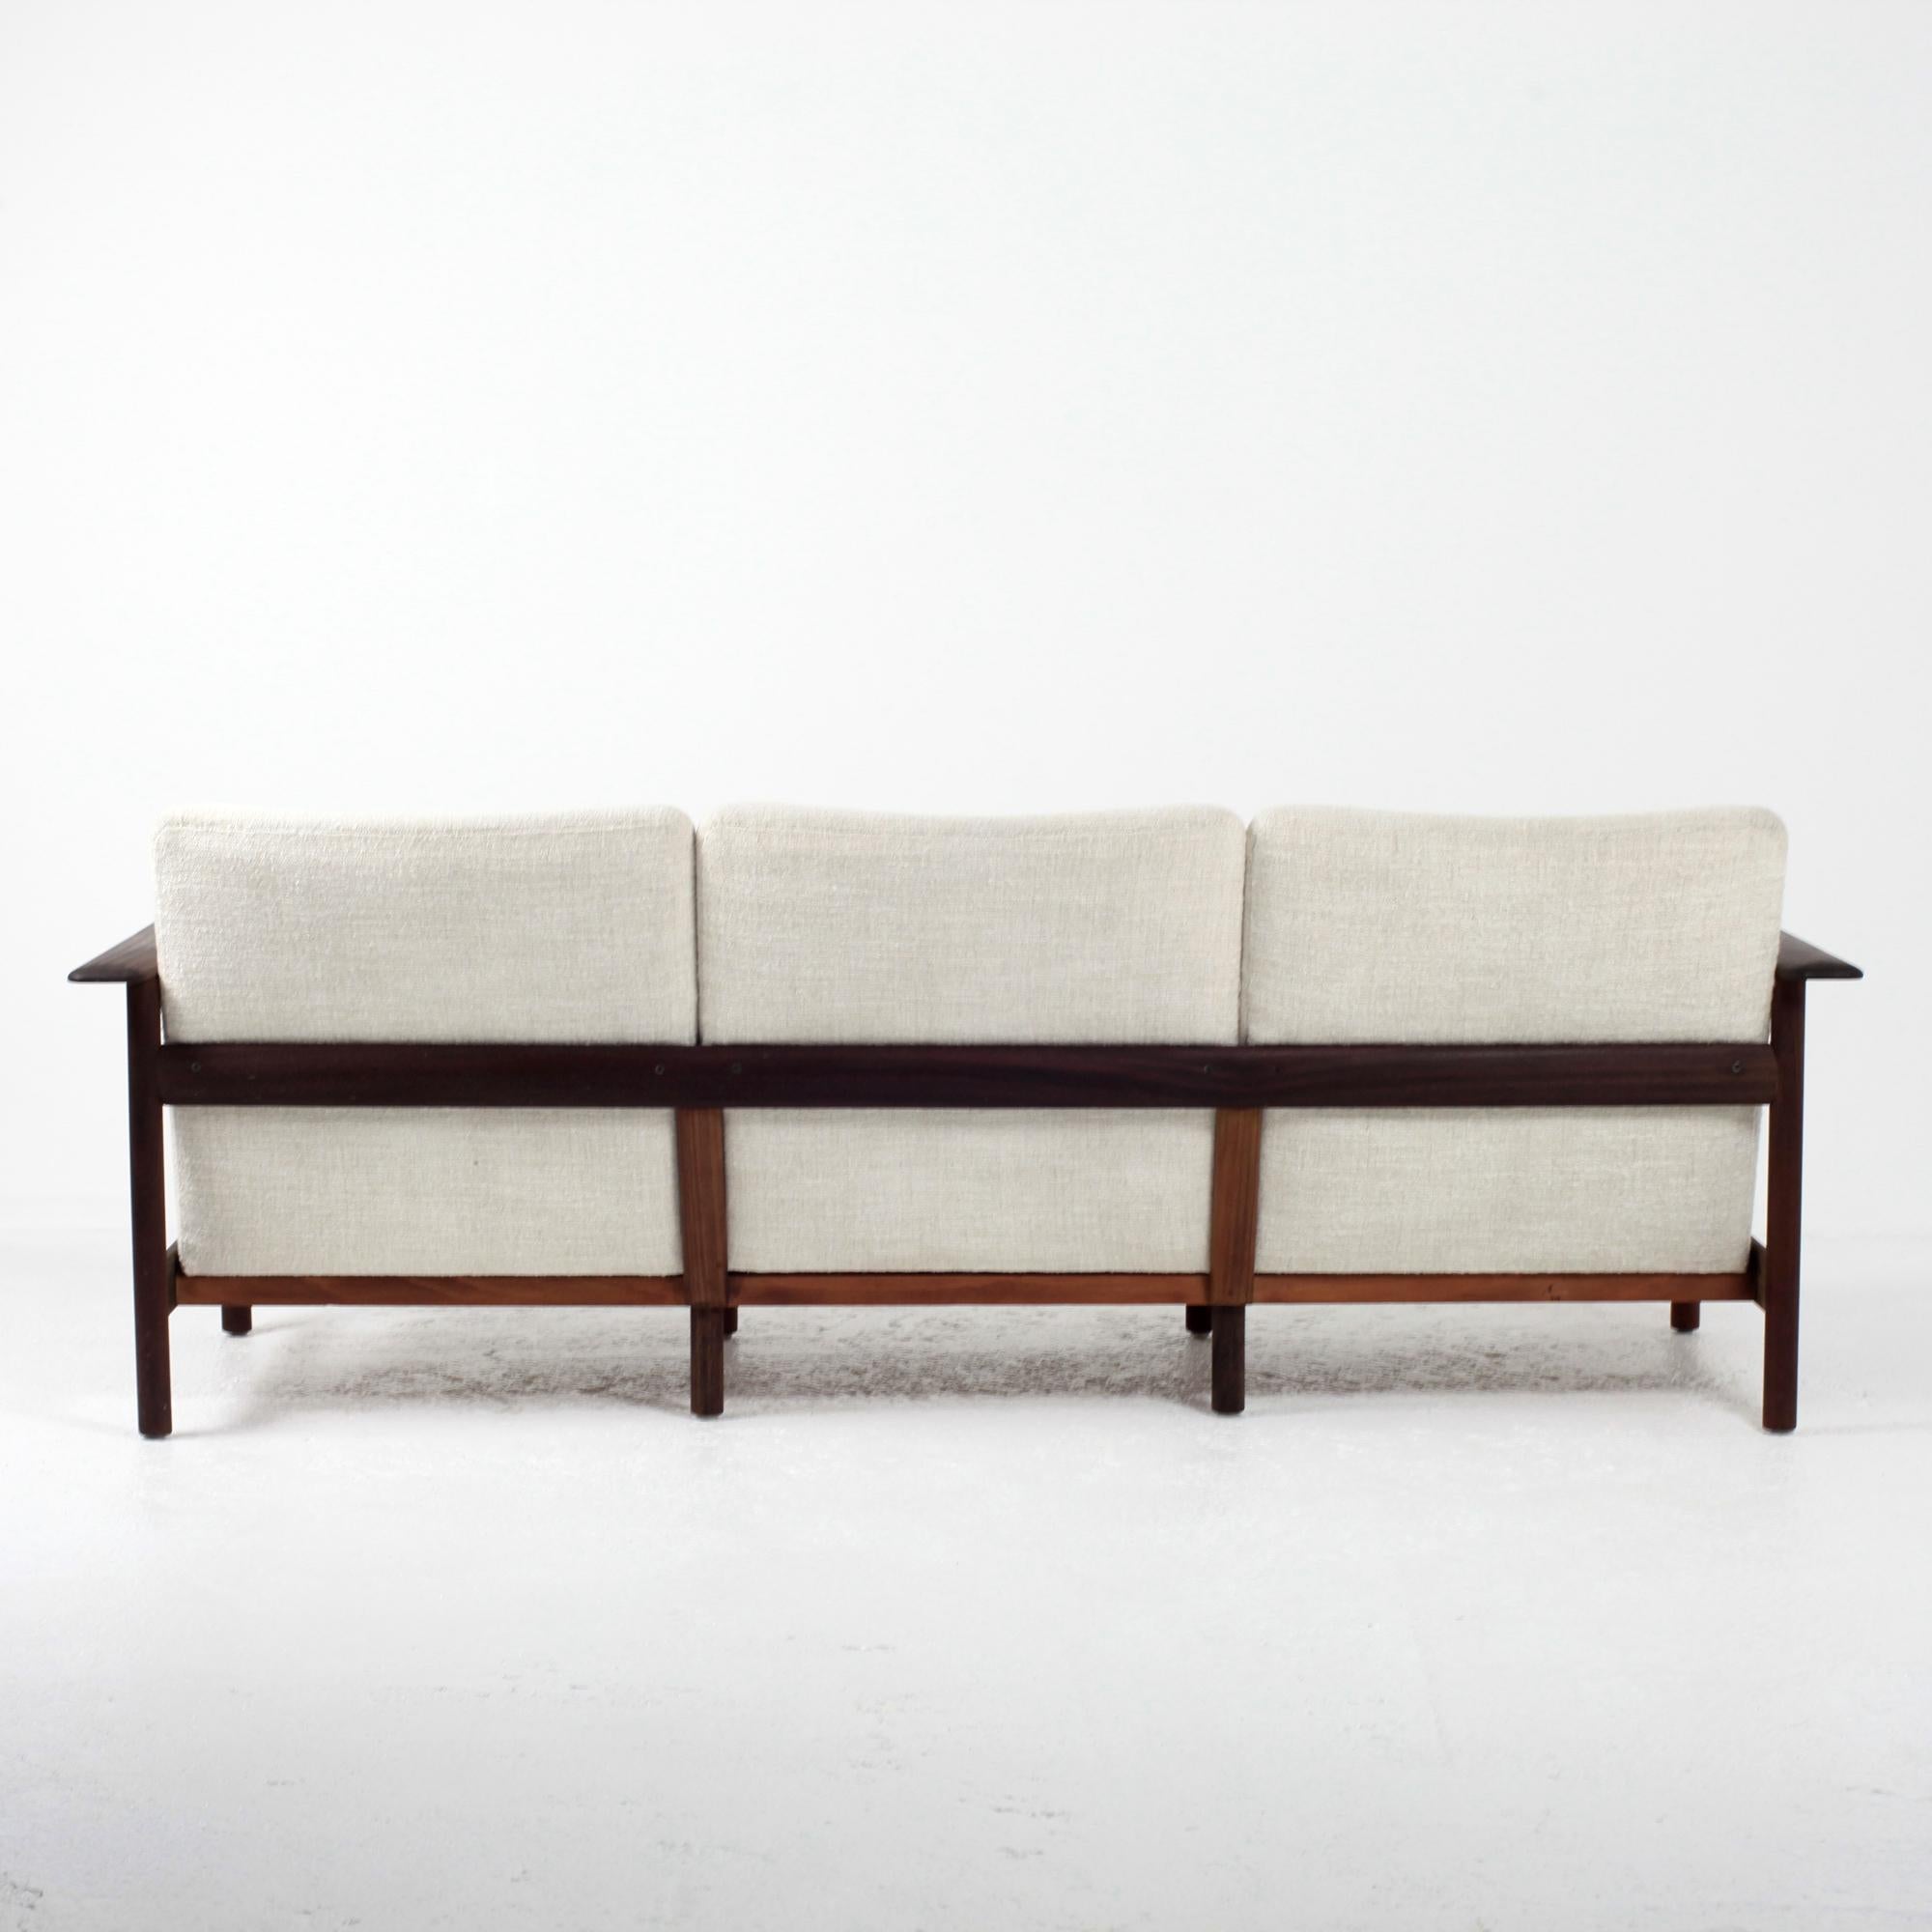 French Steiner Sofa Solid Wood Frame and Pierre Frey Fabric, France, 1960s For Sale